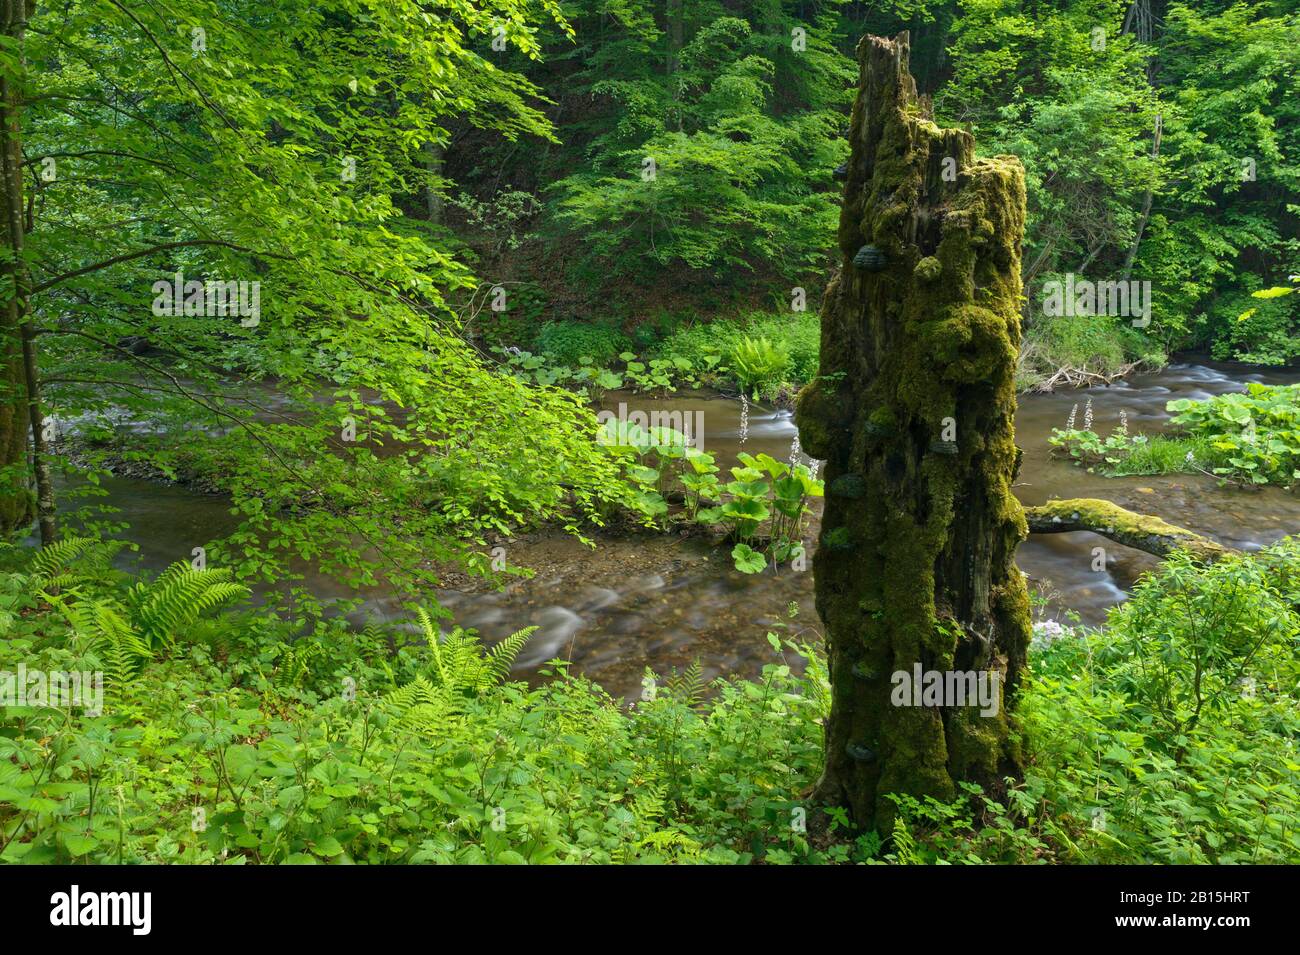 Semenic National Park / Romania: UNESCO World Heritage protected primary beech forest 'Nera Springs'. In the rest of the park logging is omnipresent. Stock Photo